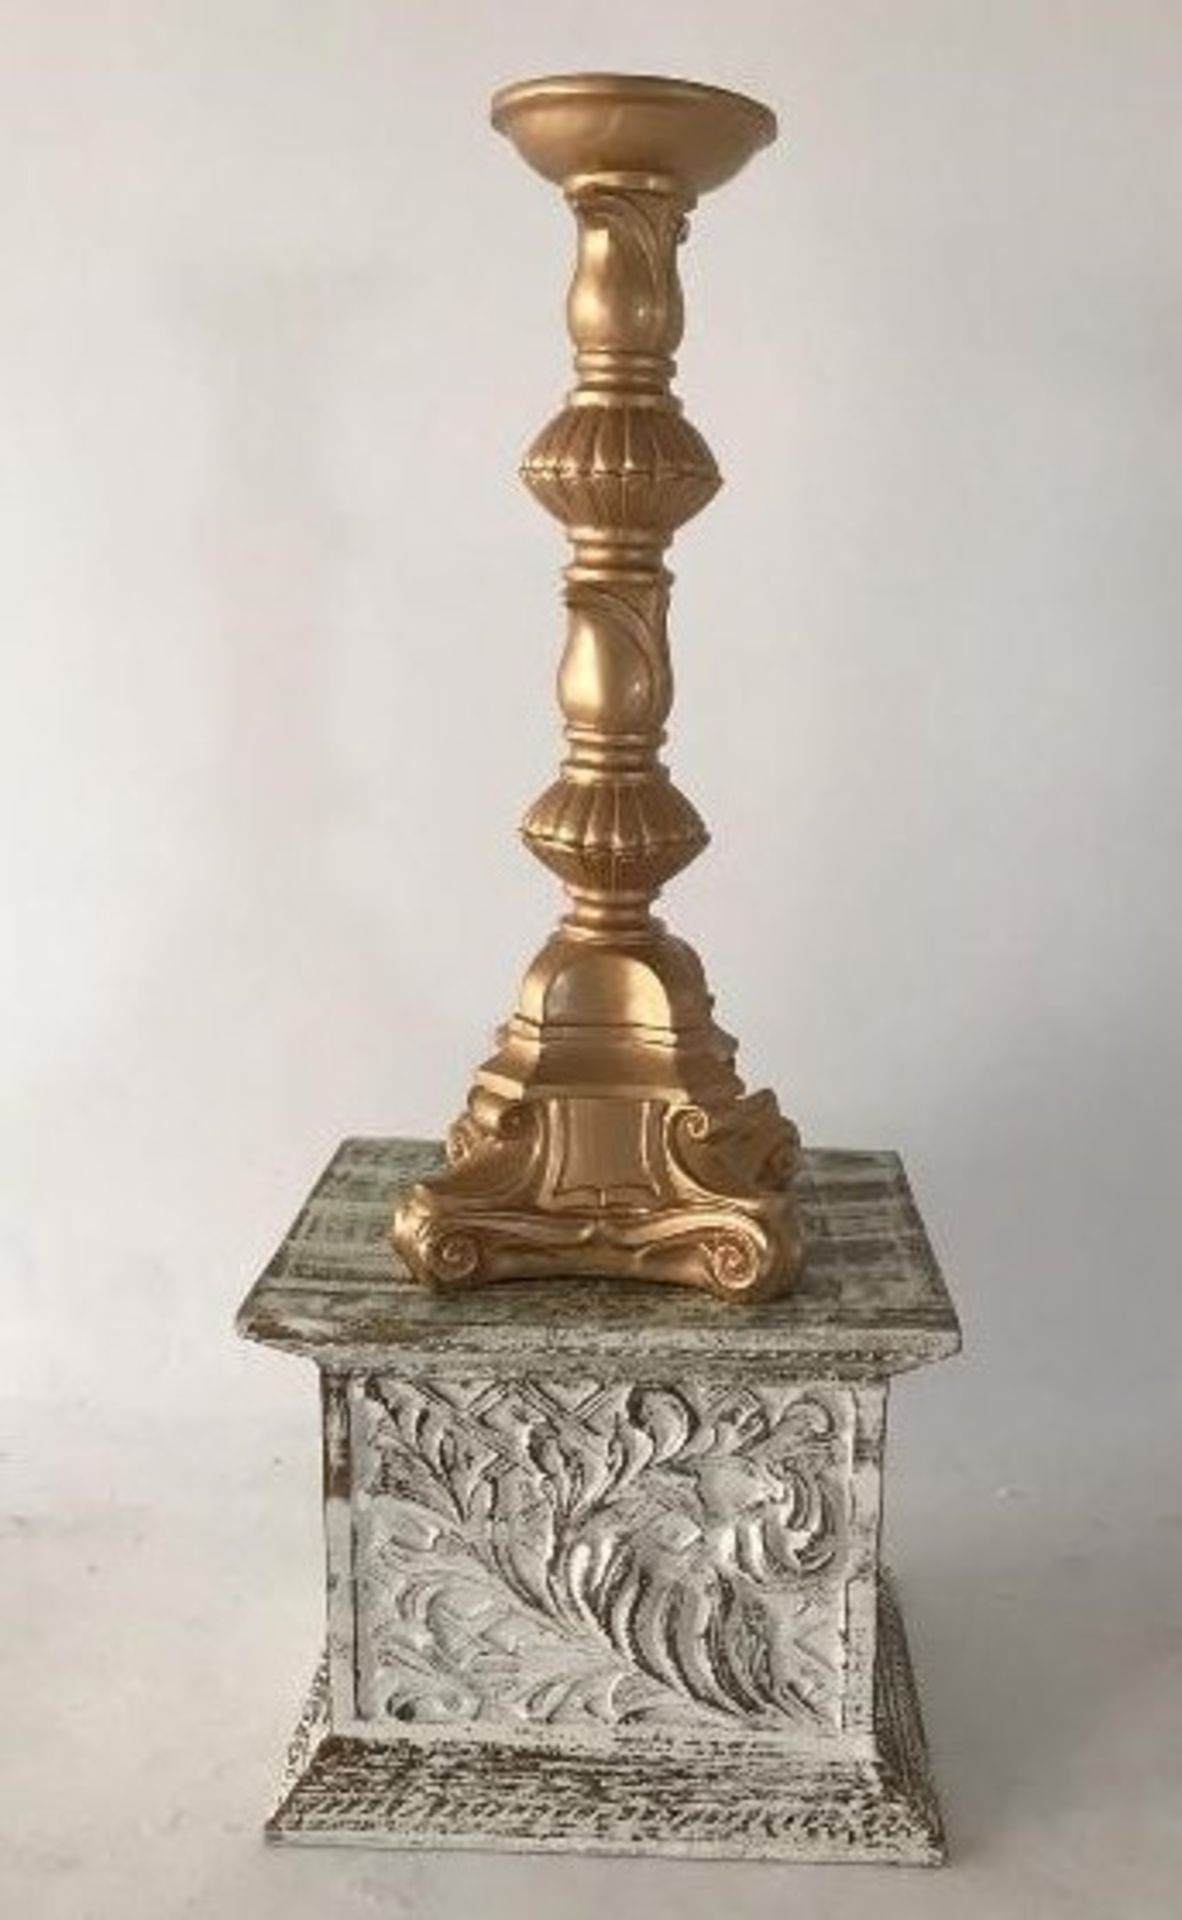 4 x Ornate Gold Flower Stands - Dimensions: 1.2m - Pre-owned - CL548 - Location: Market Harborough - Image 2 of 3